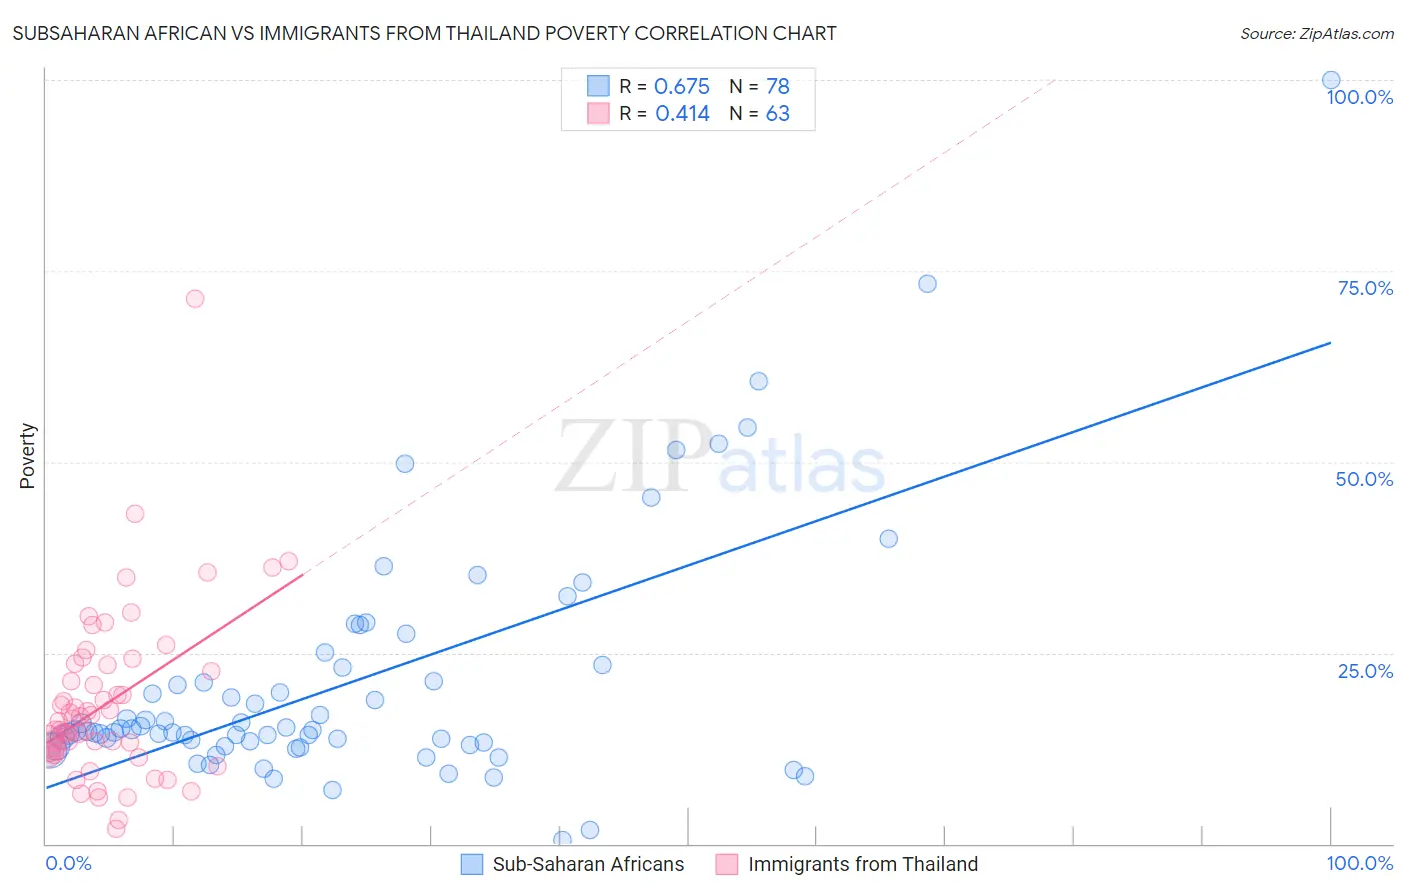 Subsaharan African vs Immigrants from Thailand Poverty